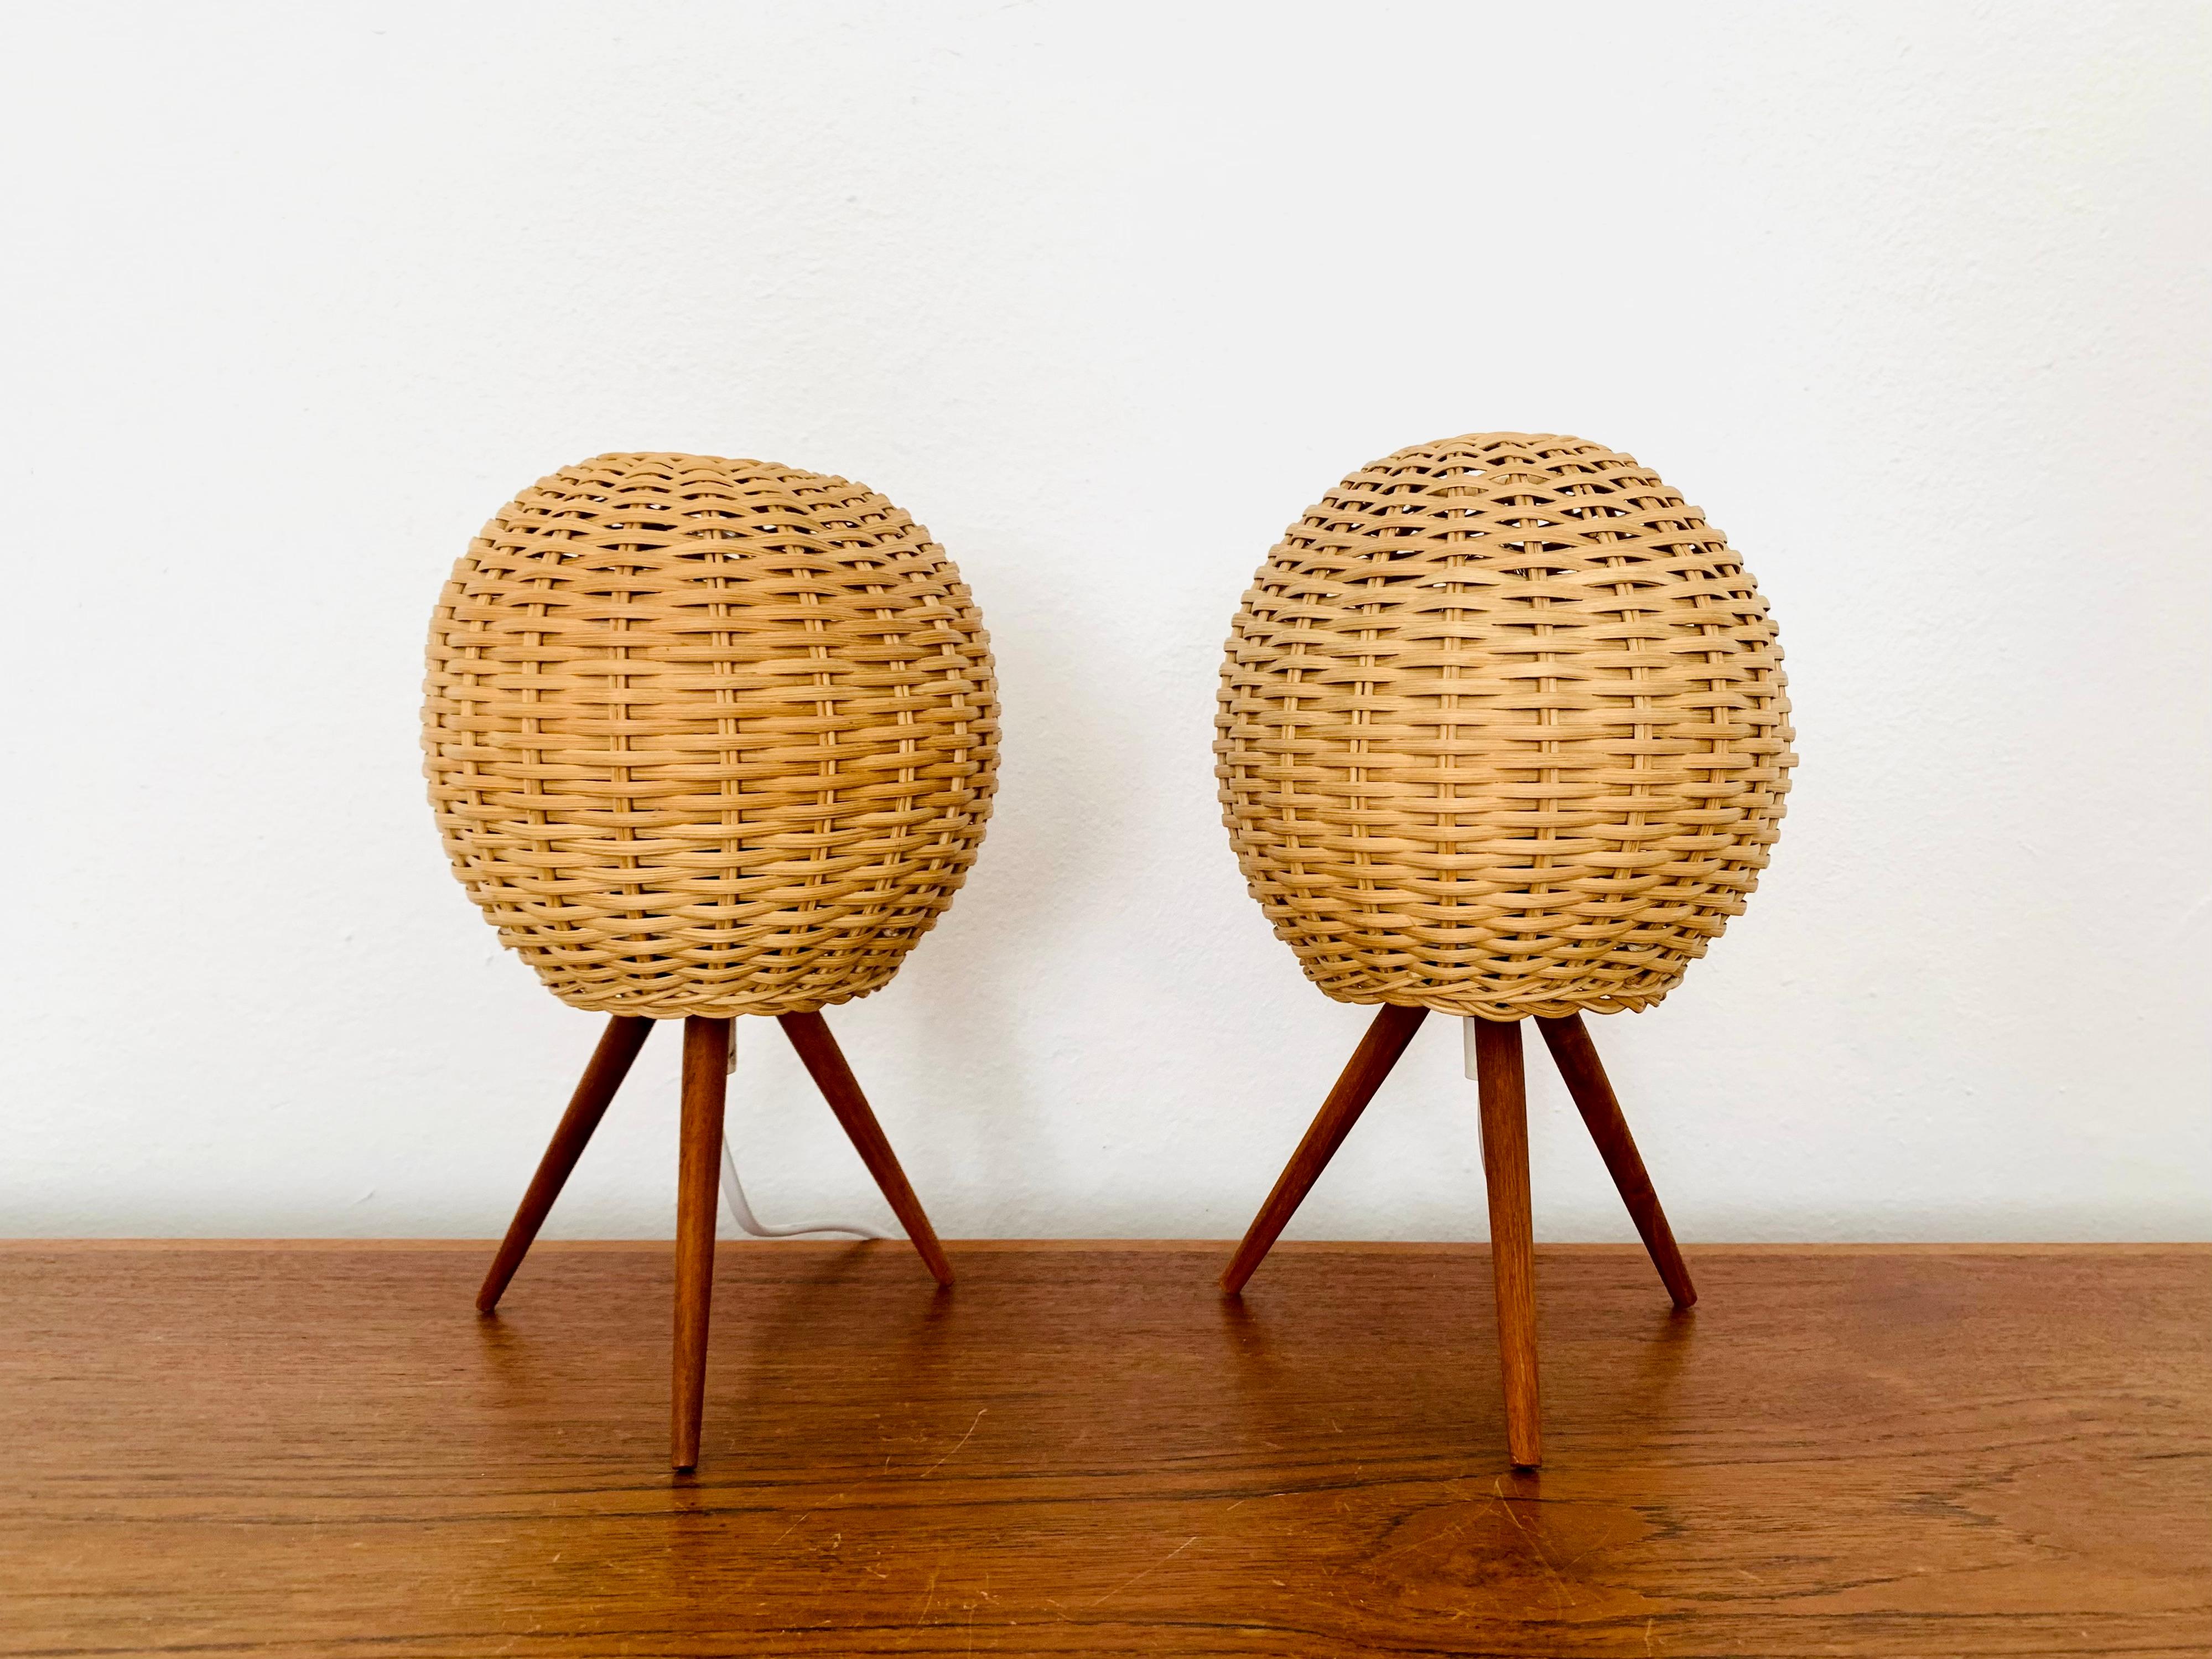 Wonderful Danish table lamps from the 1950s.
Extraordinary design with a fantastically comfortable look.
The rattan lampshades create a cozy light.
Beautiful three-legged teak feet.

The price refers to 2 lamps.

Condition:

Very good